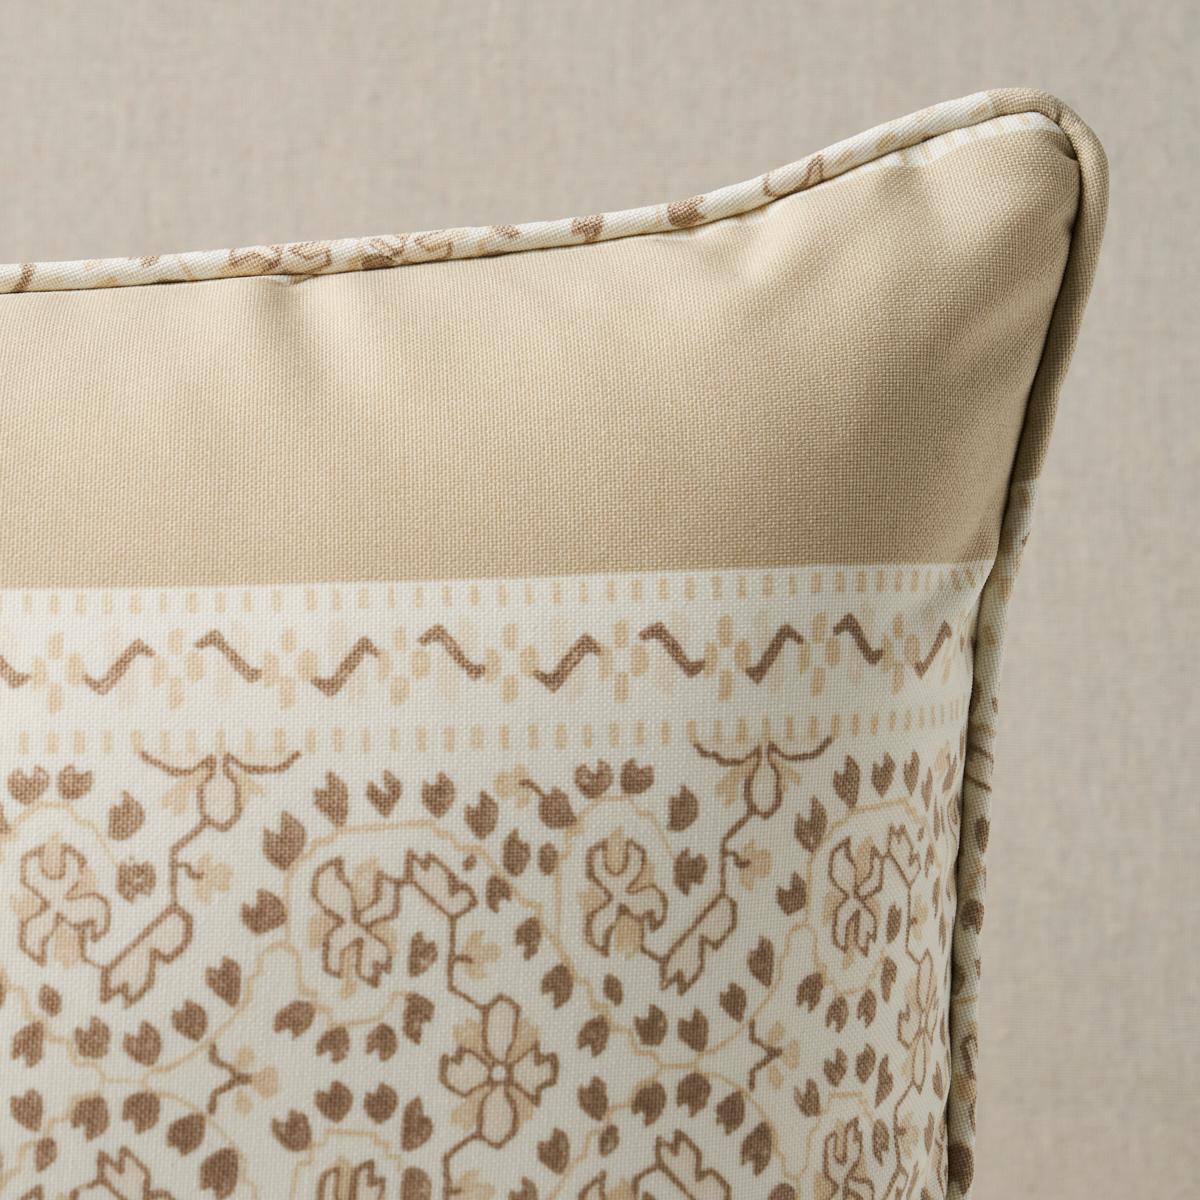 This pillow features Jasmine Indoor/Outdoor by Mark D. Sikes for Schumacher with a self welt finish. Inspired by traditional Indian block prints, Jasmine Indoor/Outdoor in neutral by Mark D. Sikes is a stylish high-performance fabric that can stand